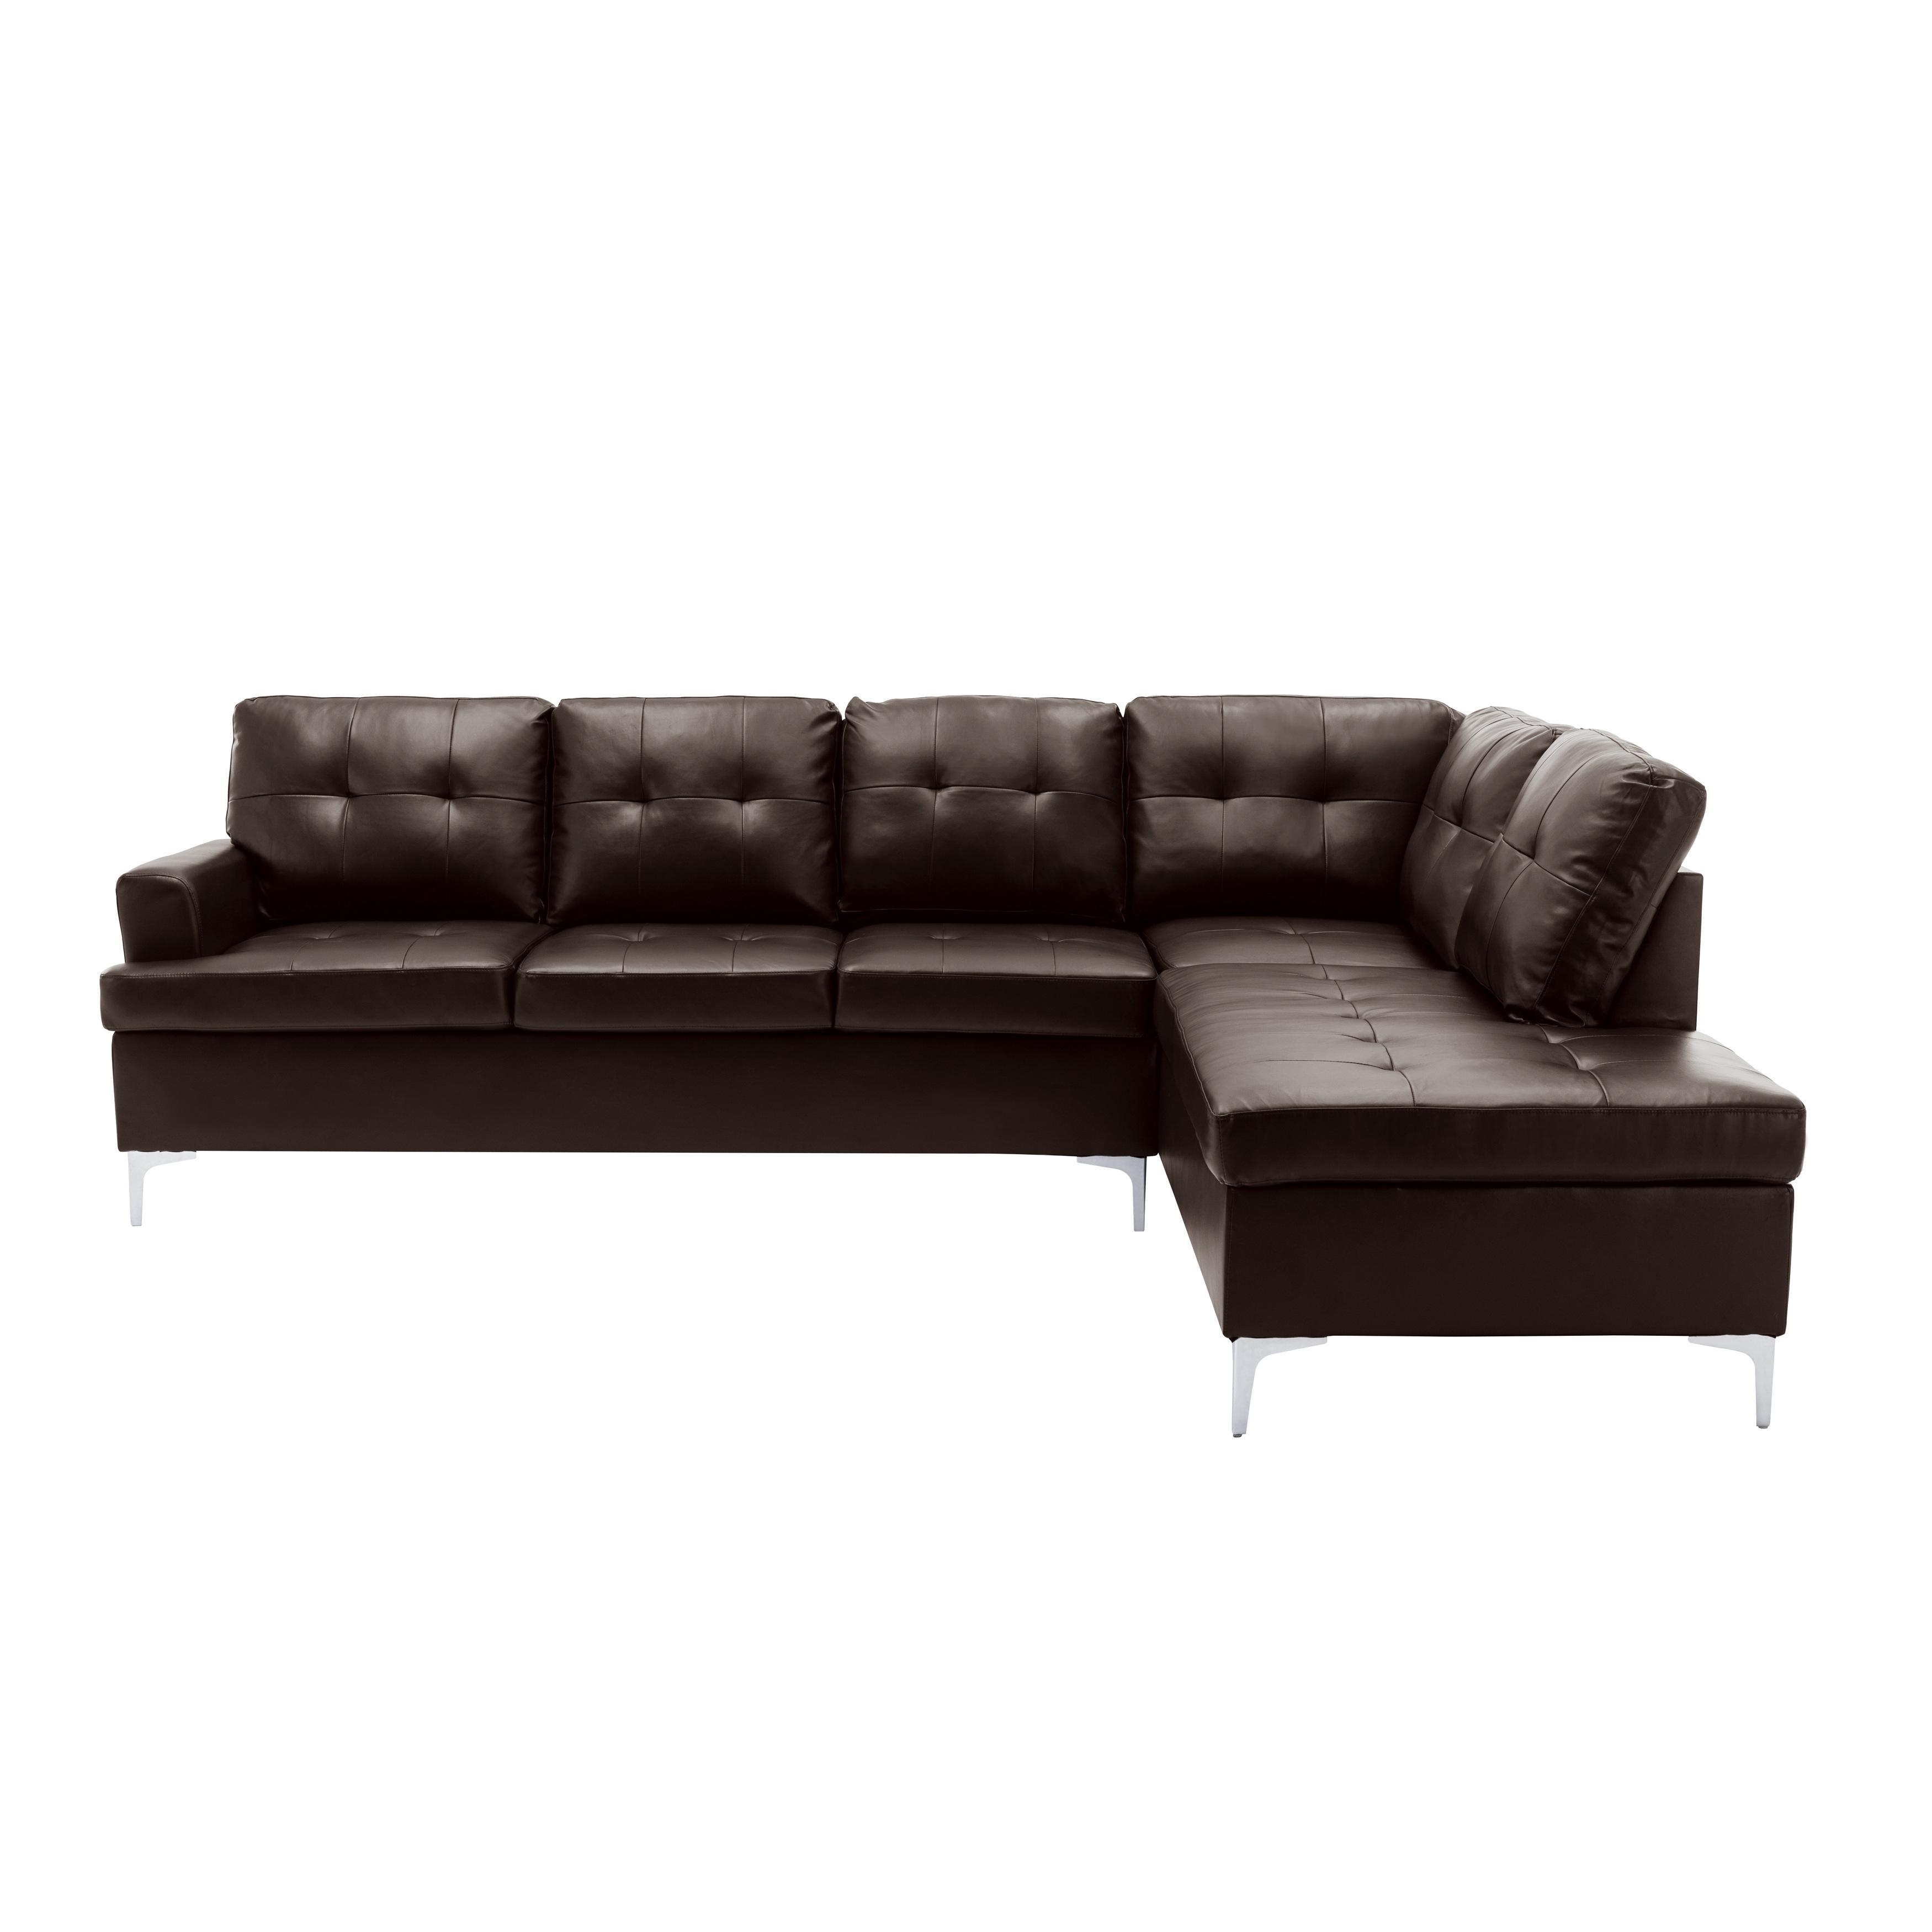 

    
Contemporary Brown Faux Leather 2-Piece Sectional w/Ottoman Homelegance 8378BRW*3 Barrington
